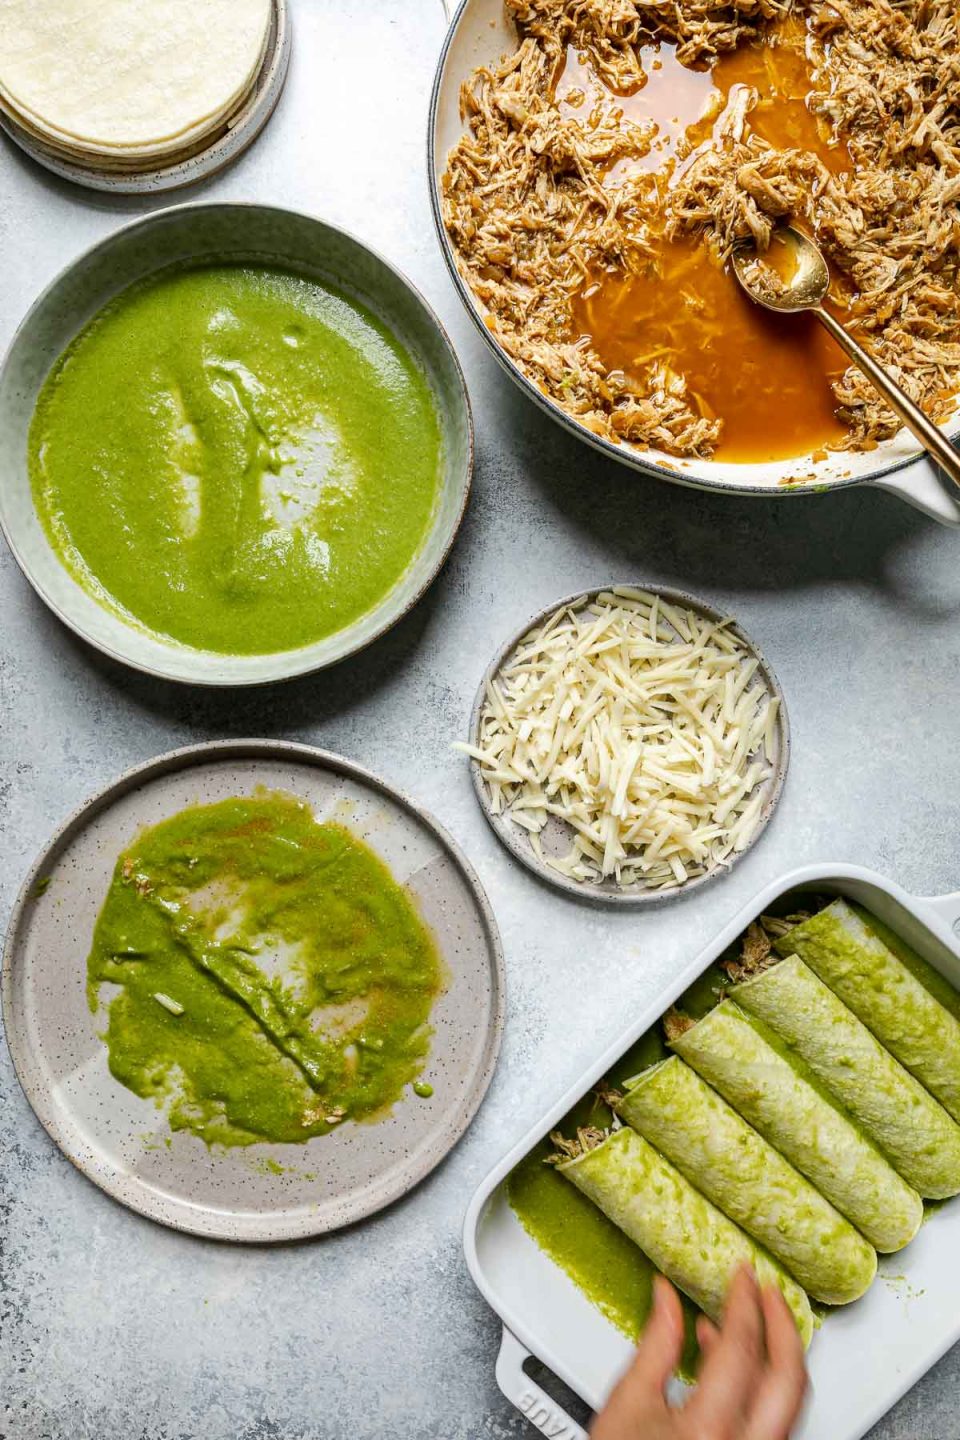 Green enchiladas assembly – green chicken enchiladas components (shredded chicken, shredded cheese, corn tortillas, & green enchiladas sauce atop a light blue surface. A woman's hands reach into the frame, placing an enchilada in a prepared baking dish with green enchilada sauce.